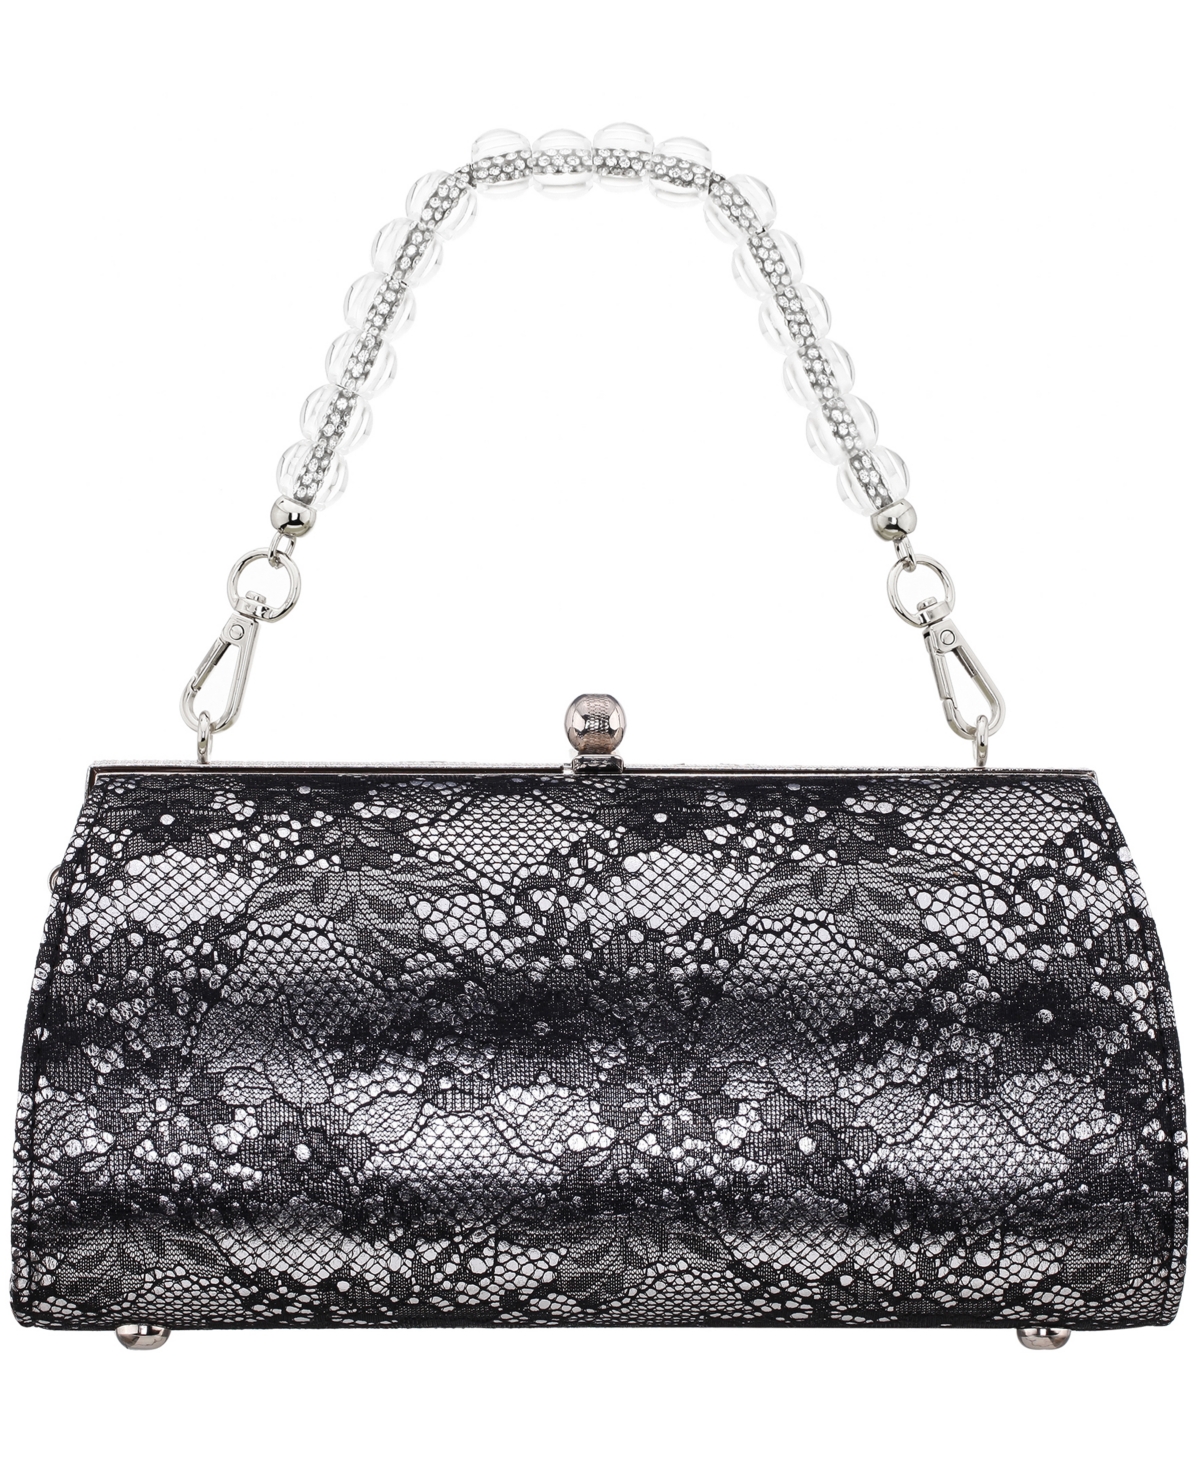 Vintage-Like Style Clutch - White, Silver